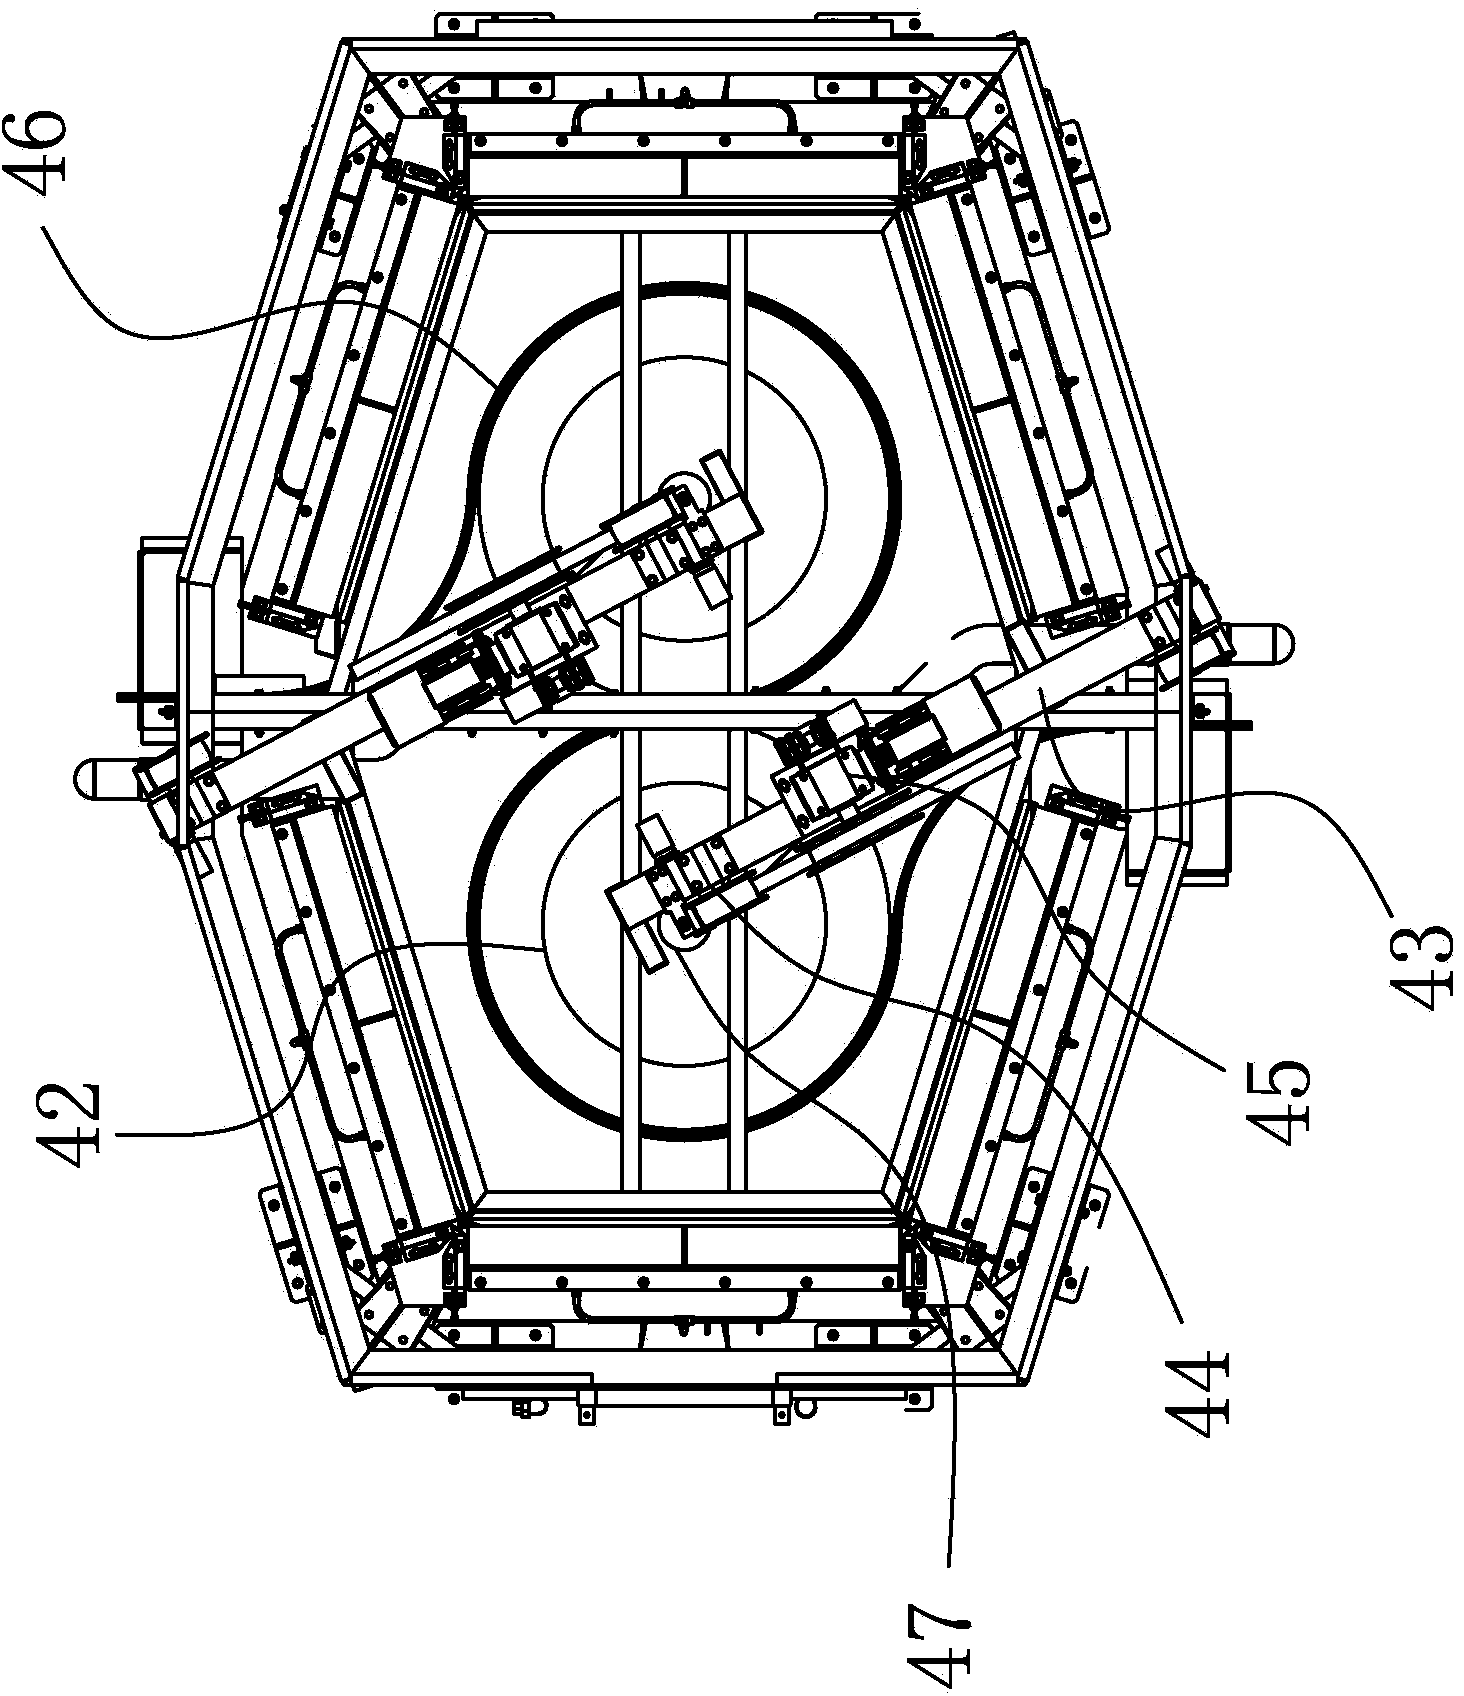 Nozzle structure for spraying device